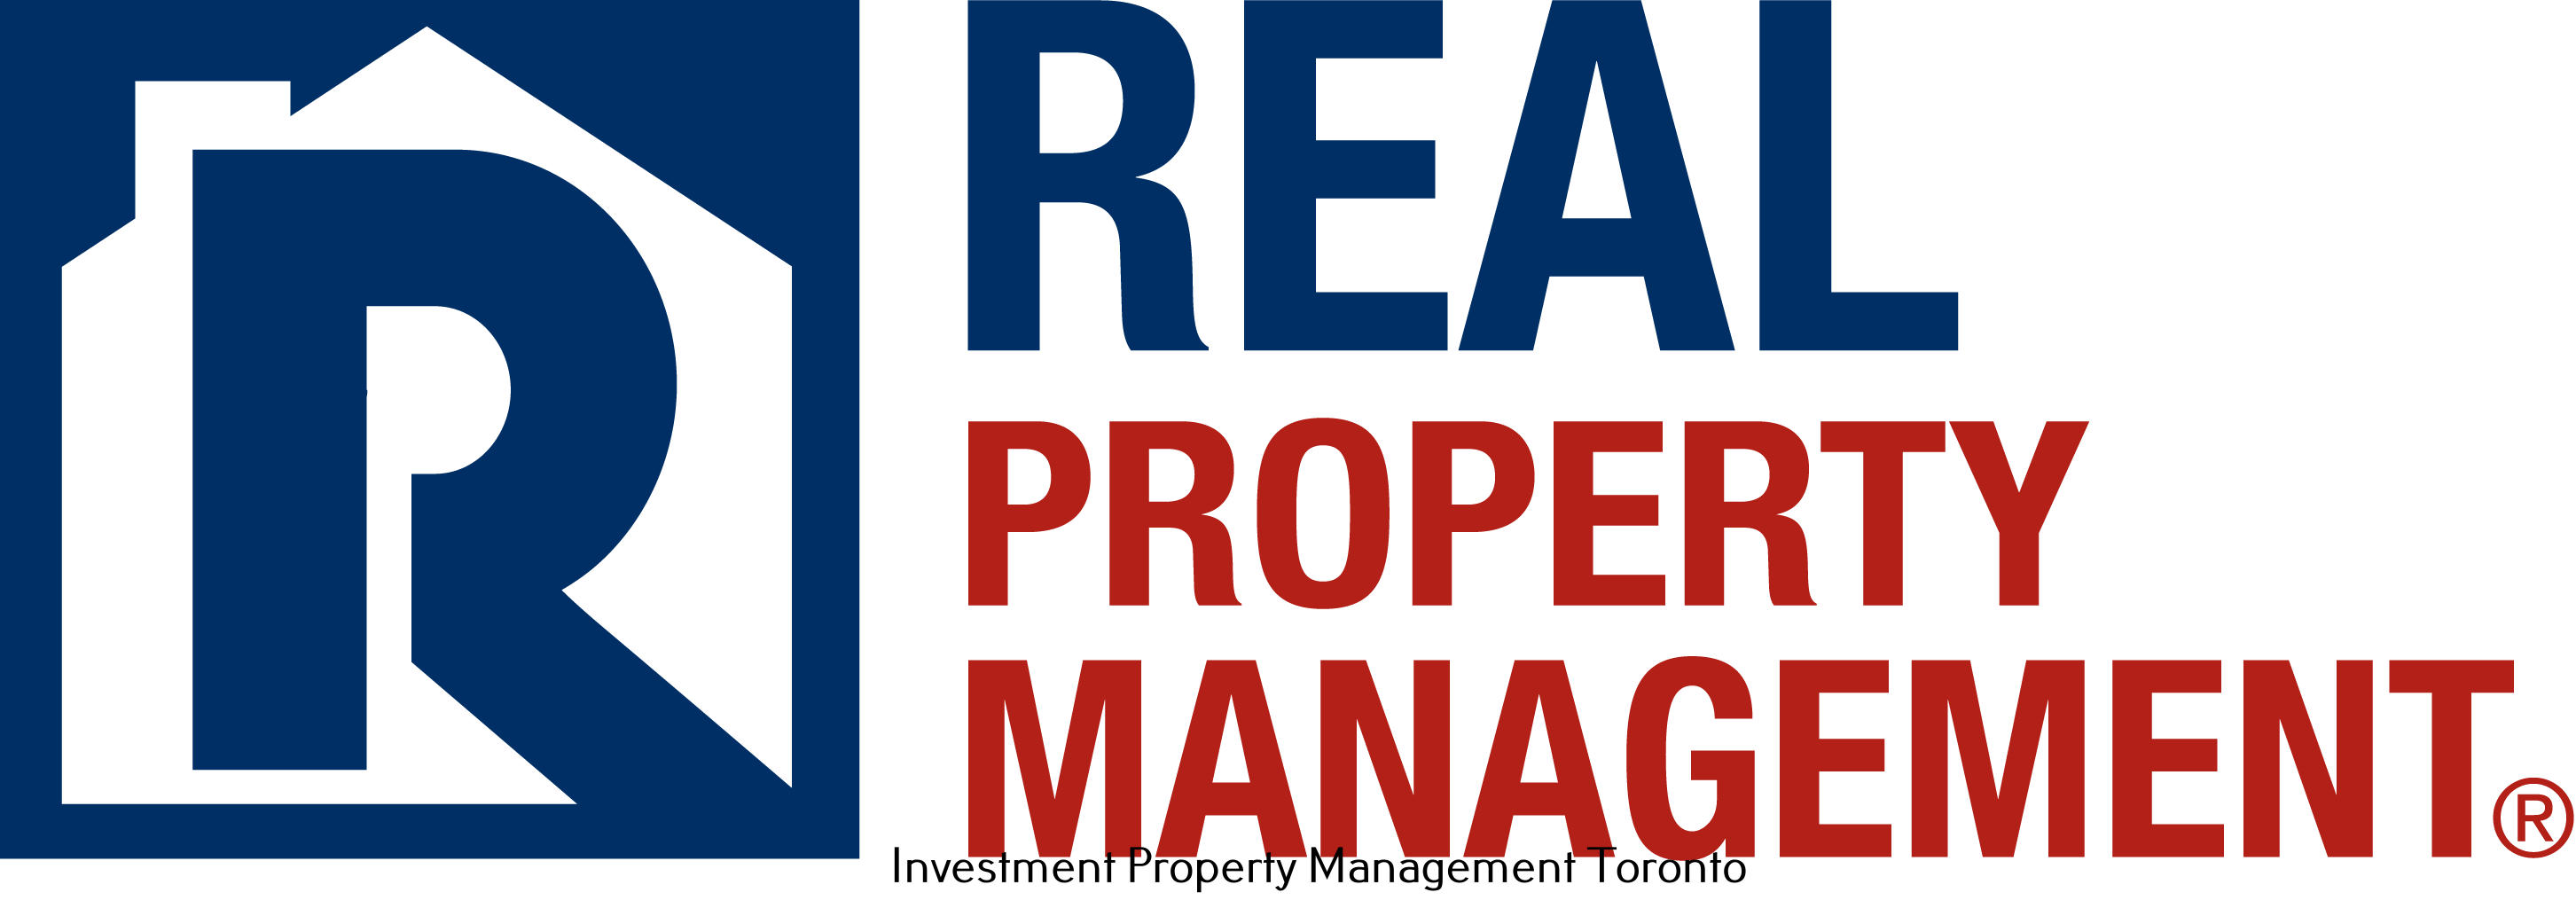 Real Property Management Service | Property Management Toronto Highlights the Importance of Tenant Screening in Property Management